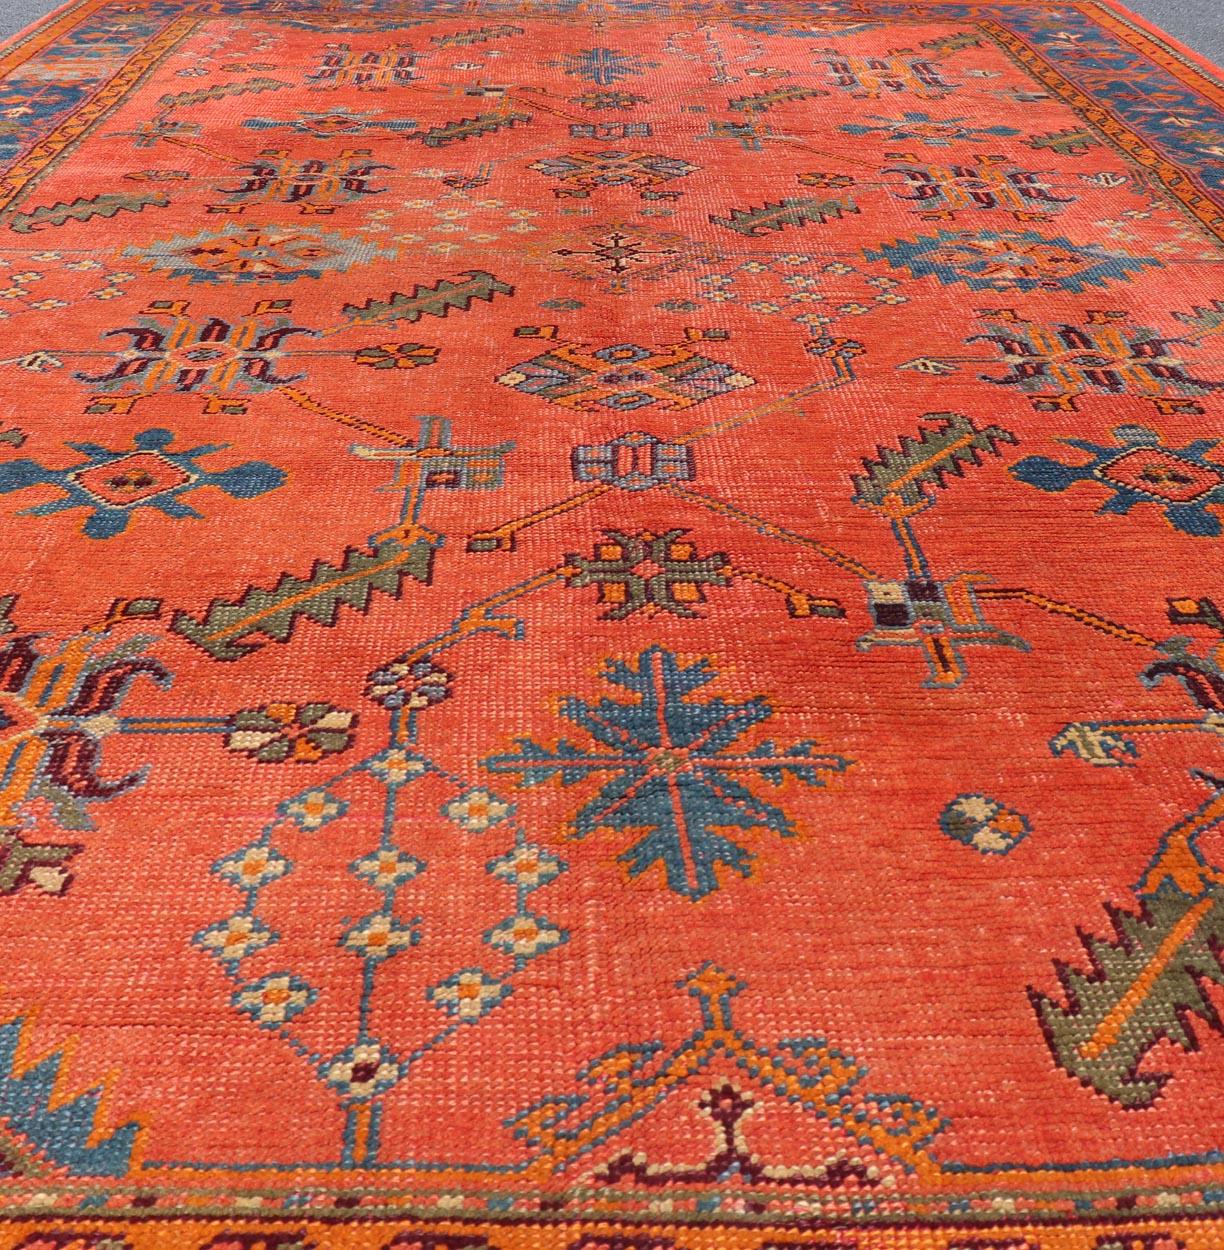 Hand-Knotted Antique Turkish Oushak Colorful Rug With All-Over Design In Salmon and Blue's  For Sale